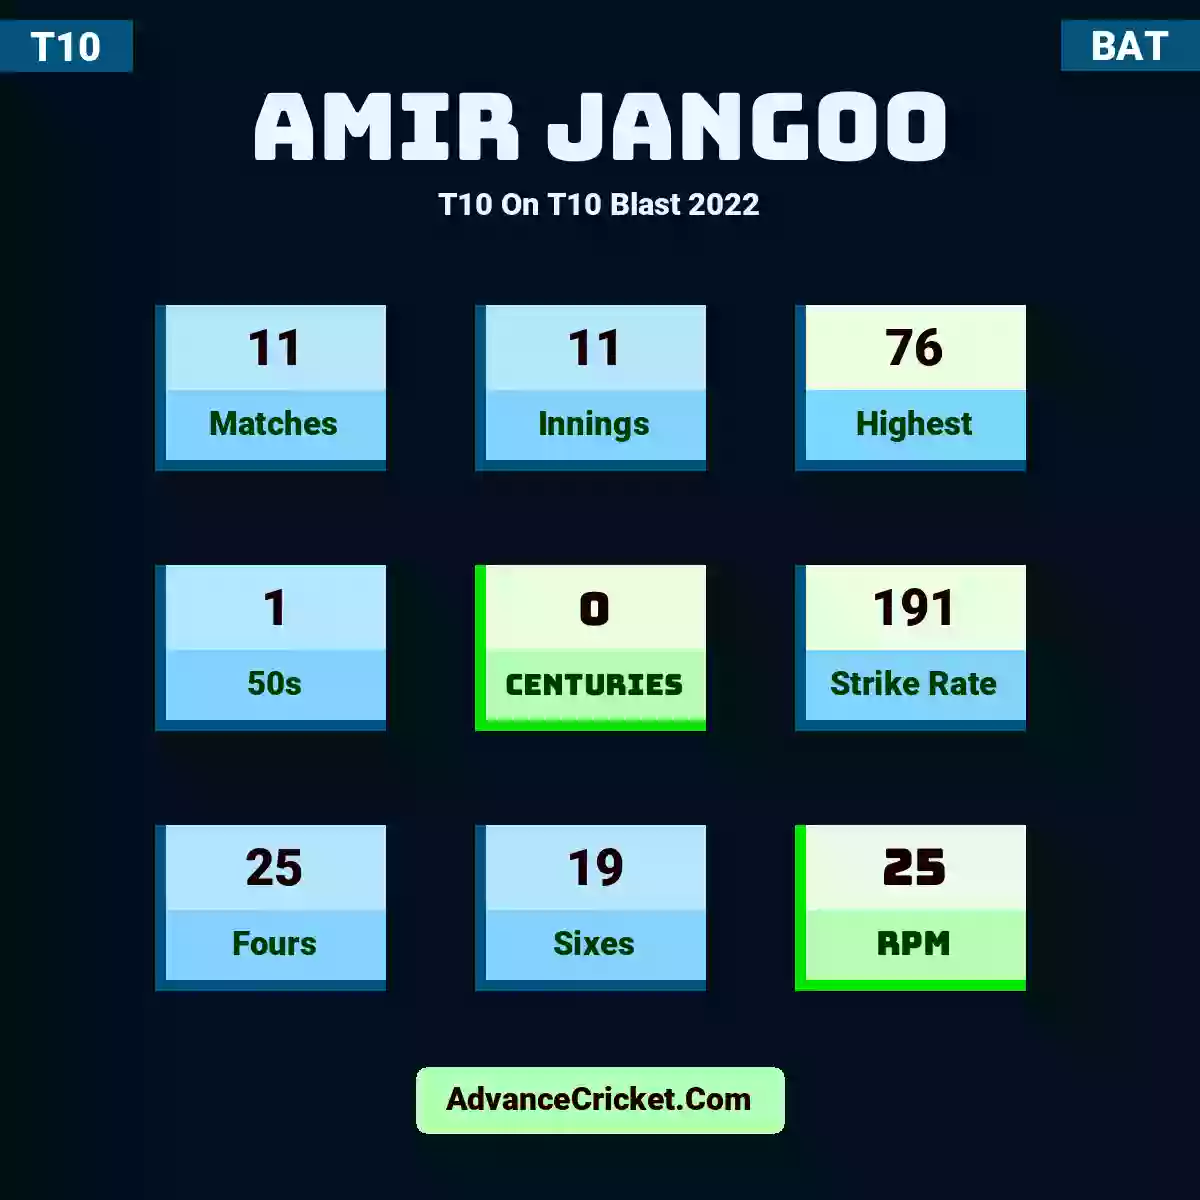 Amir Jangoo T10  On T10 Blast 2022, Amir Jangoo played 11 matches, scored 76 runs as highest, 1 half-centuries, and 0 centuries, with a strike rate of 191. A.Jangoo hit 25 fours and 19 sixes, with an RPM of 25.